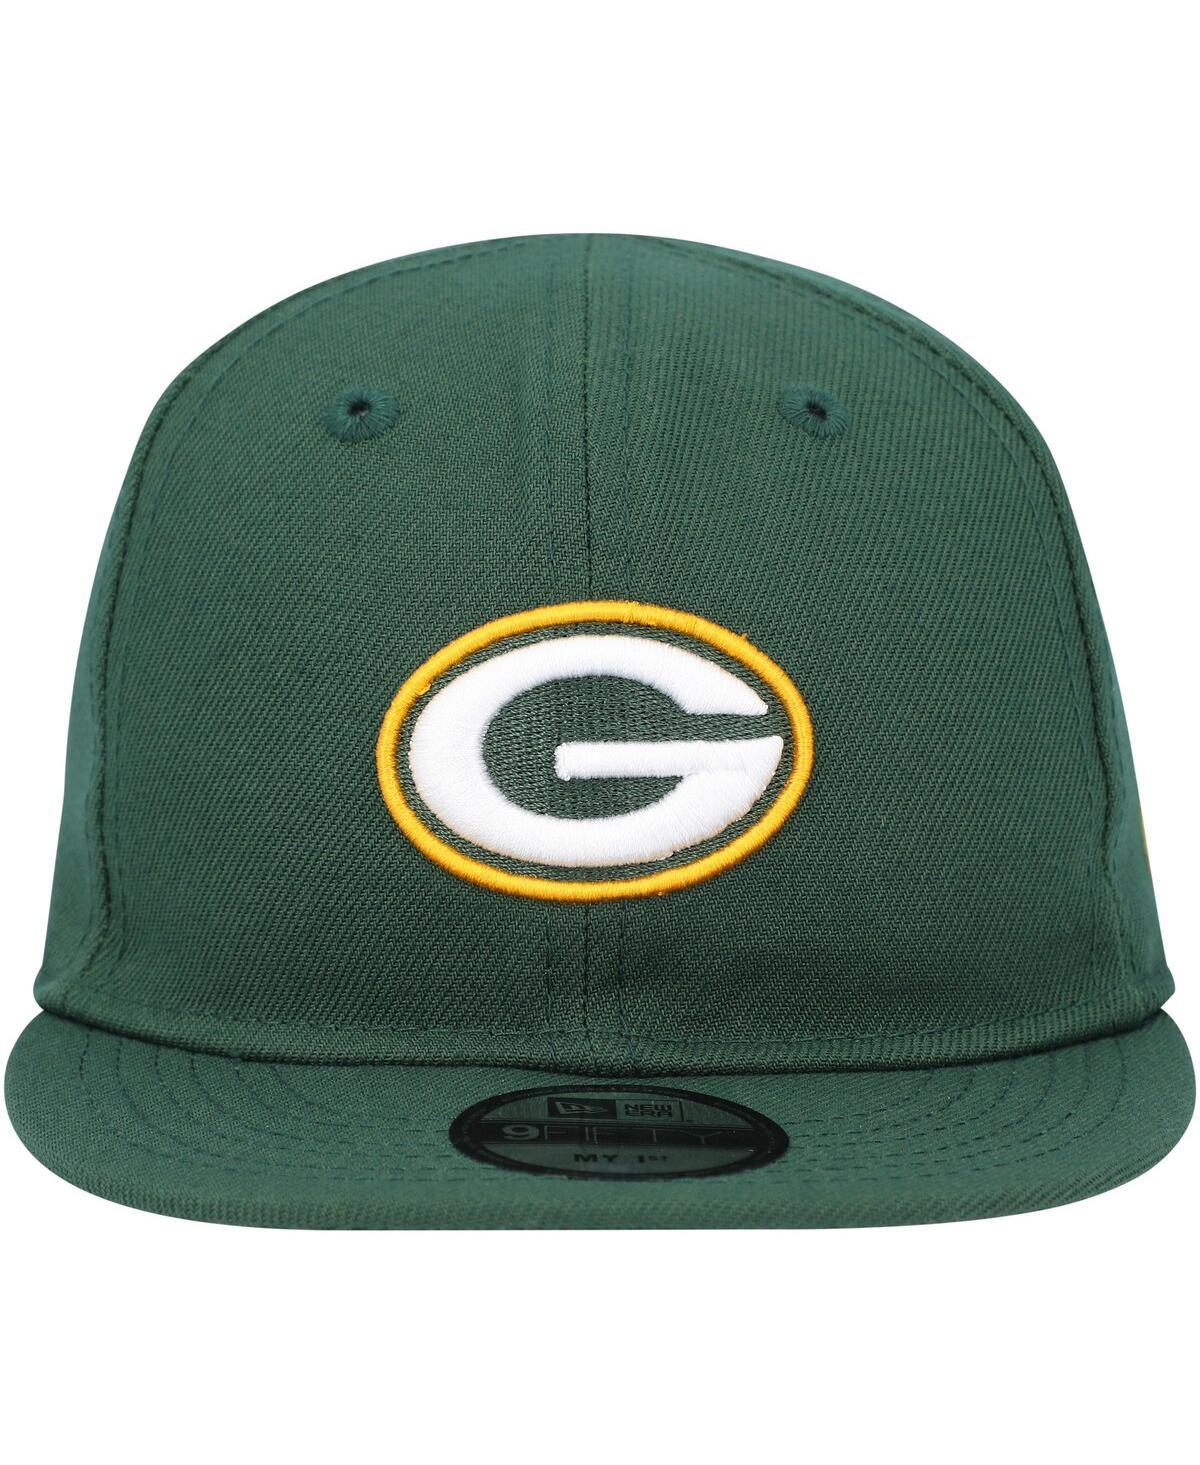 Shop New Era Infant Boys And Girls  Green Green Bay Packers My 1st 9fifty Snapback Hat